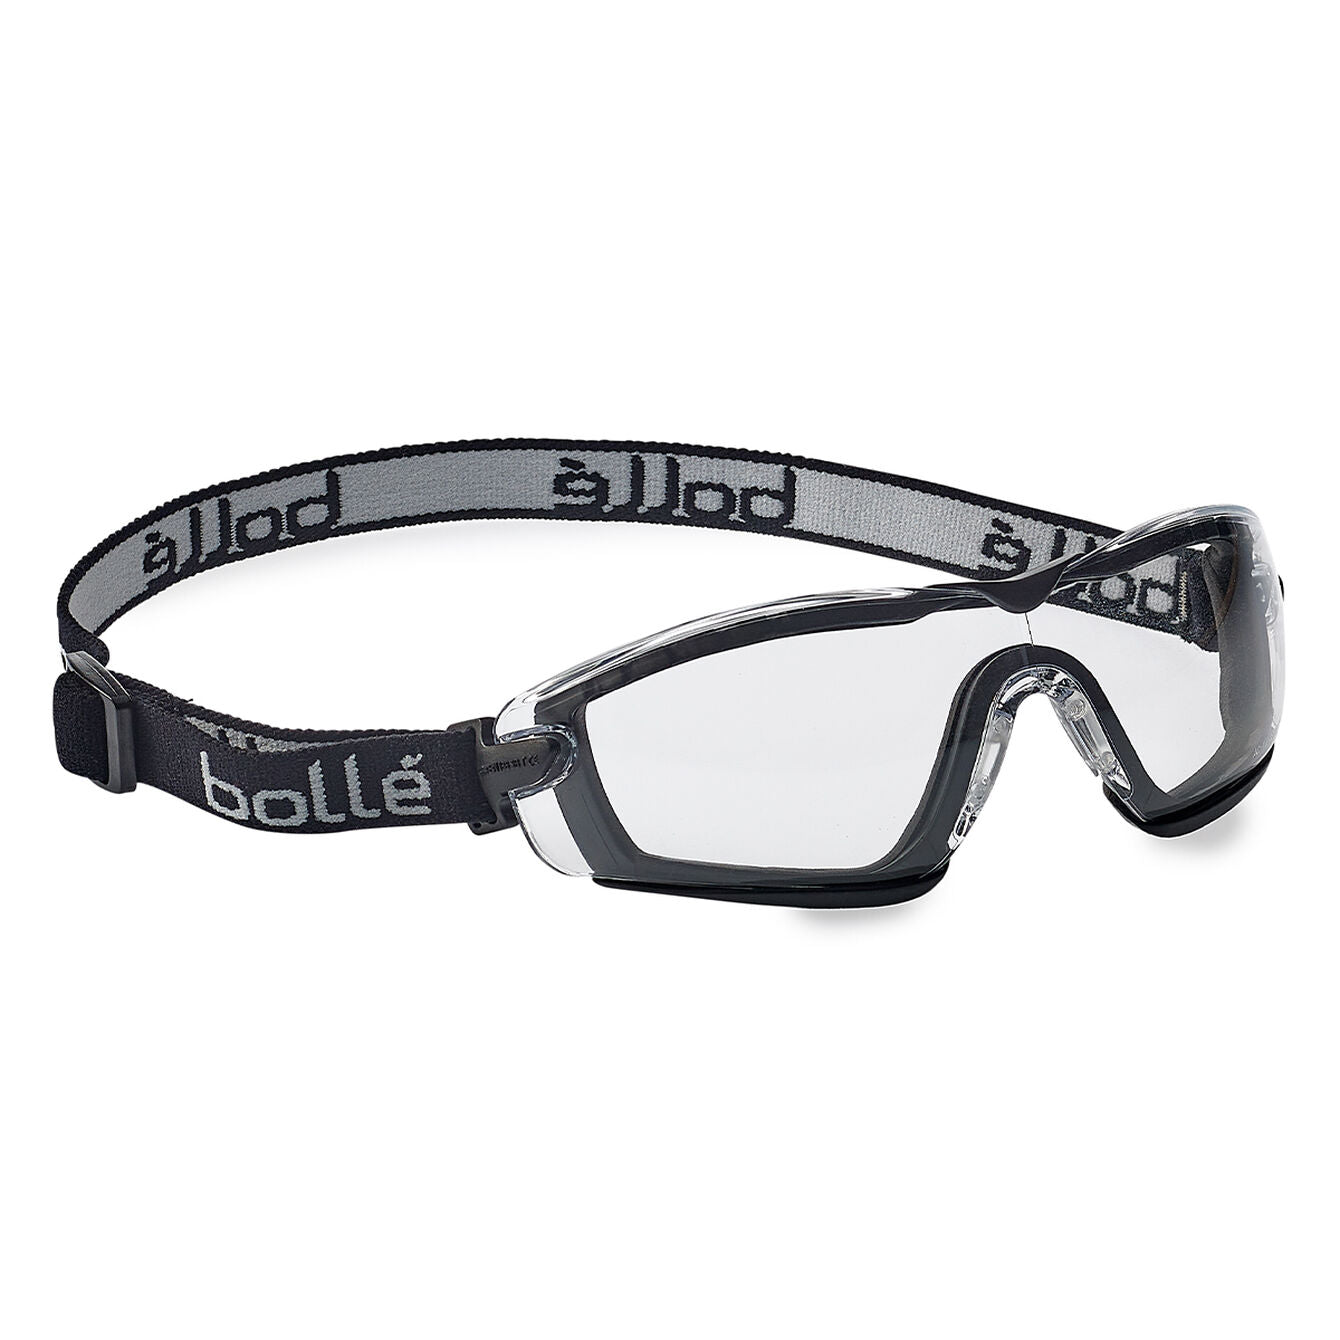 Water Safety Goggles - Bolle Cobra